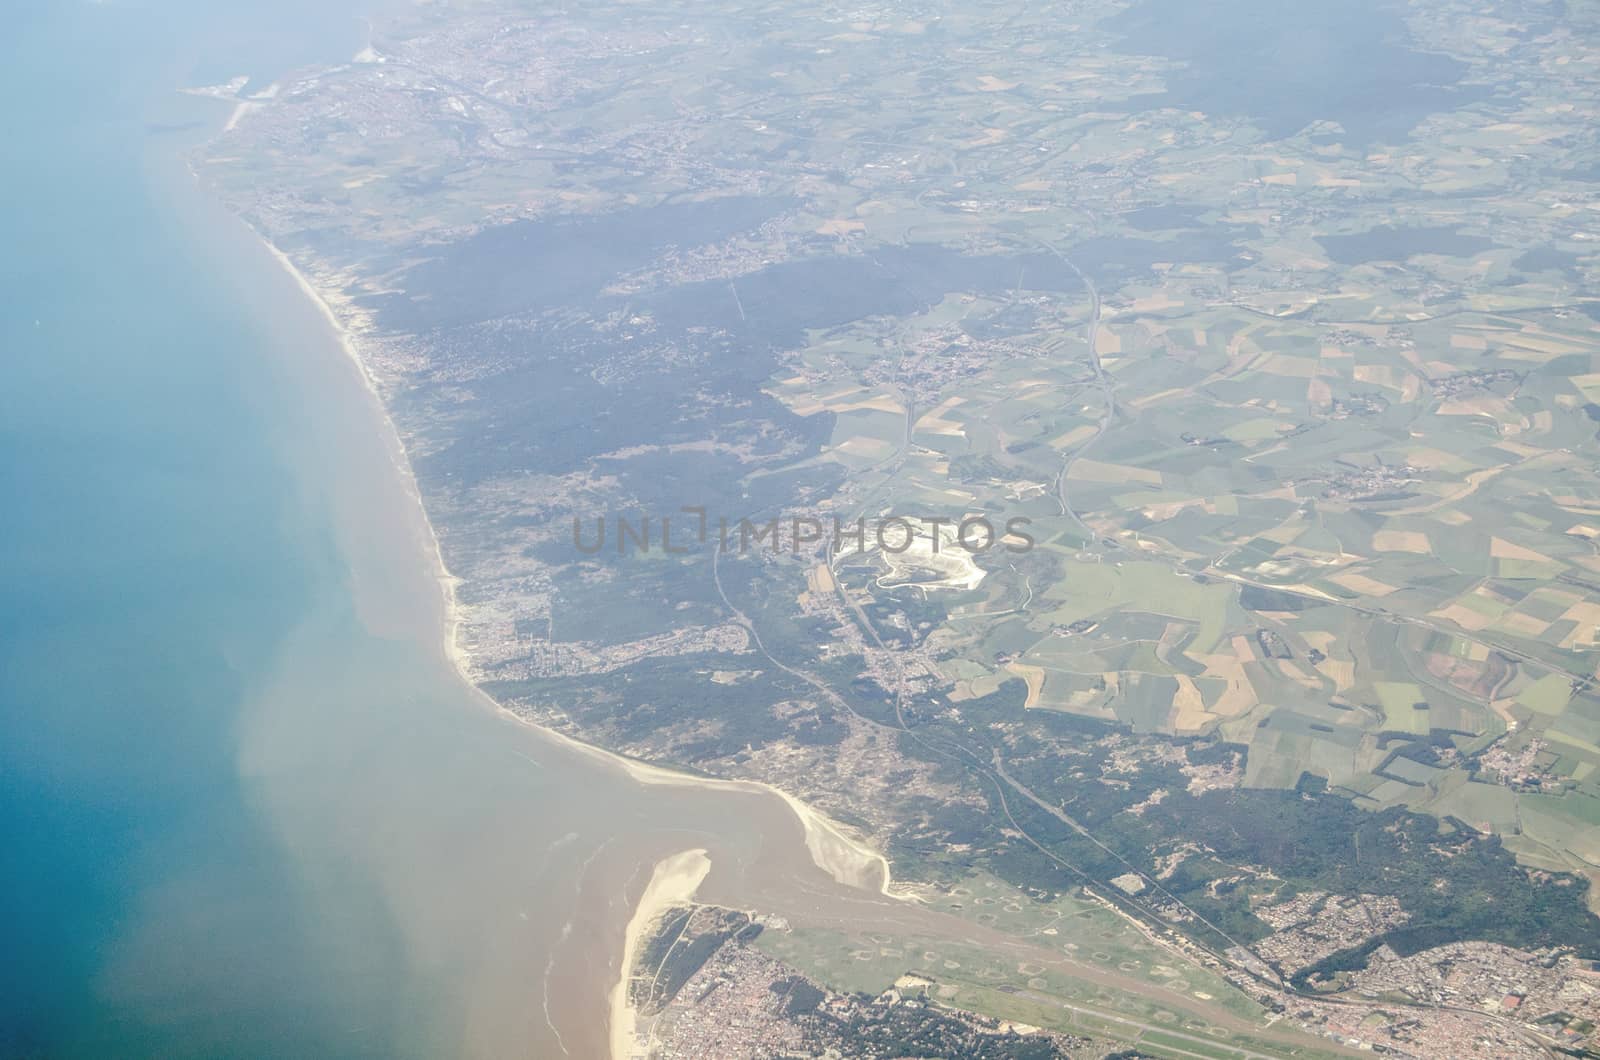 View from a plane of the French resort of Le Touquet on the shores of La Manche / English Channel in the Pas de Calais departement of Northern France. 